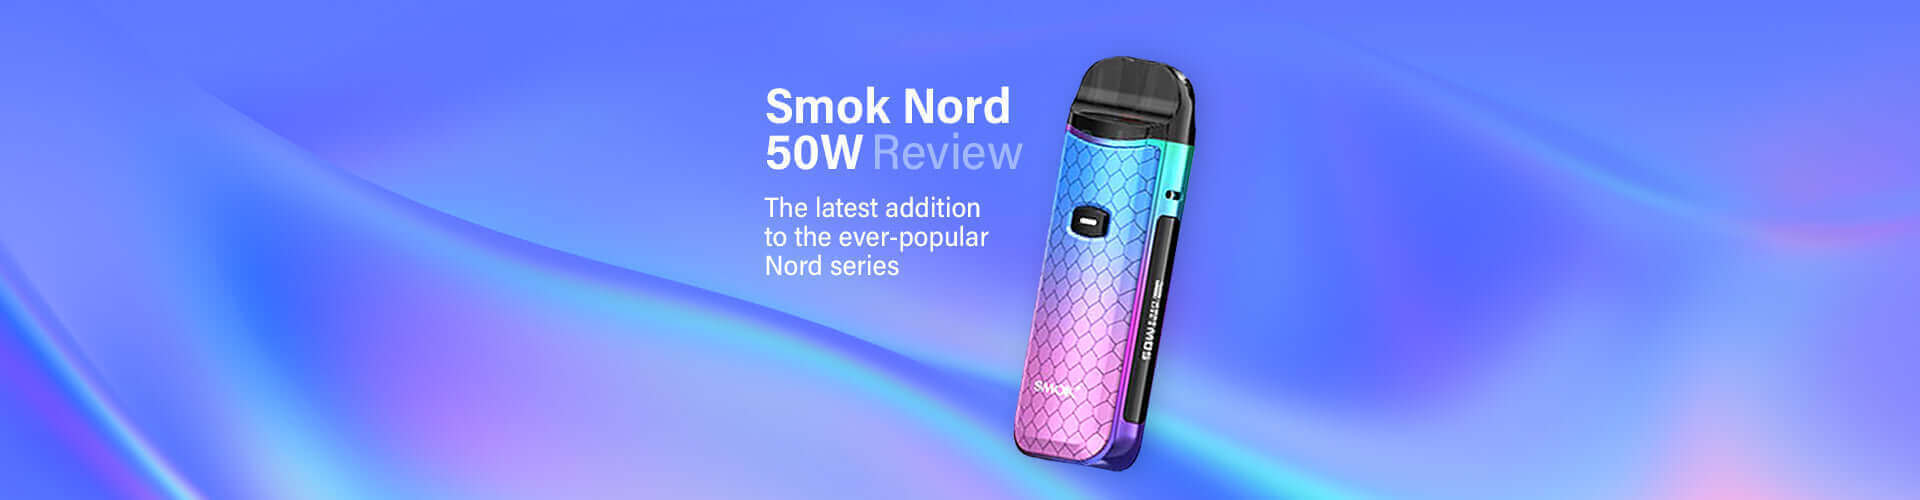 Smok Nord 50W Review: The latest in the popular Nord series - 888 Vapour